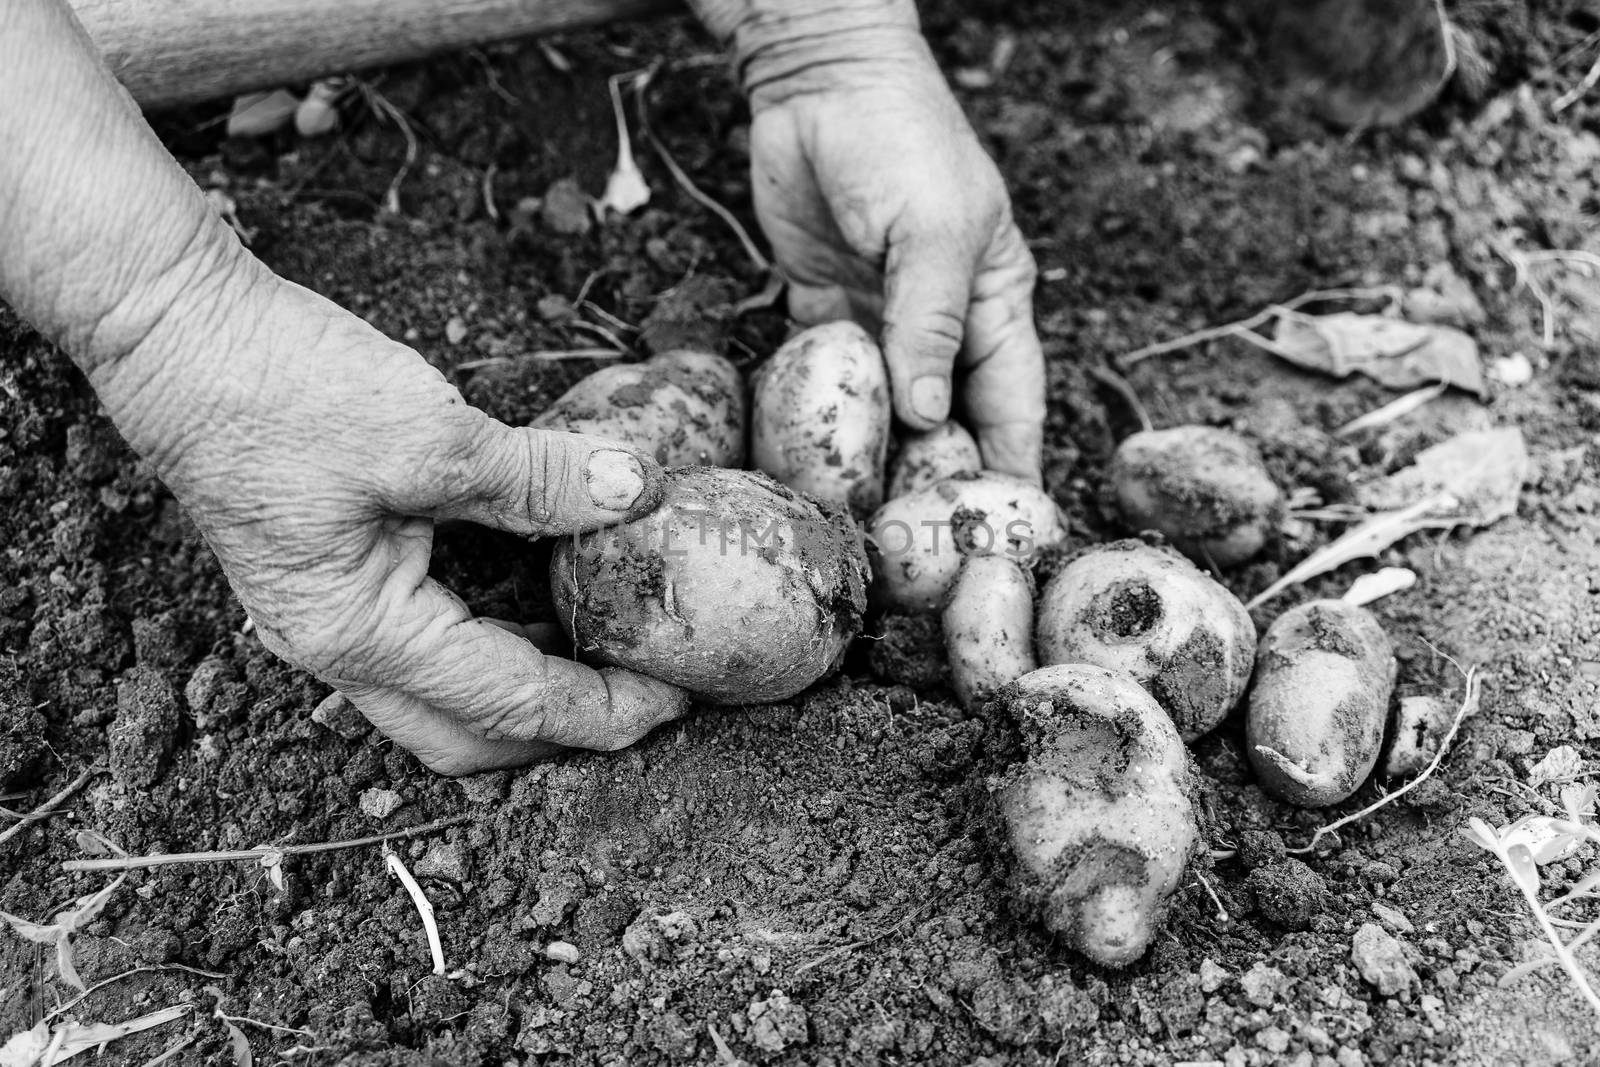 Harvesting and digging potatoes with hoe and hand in garden. Dig by vladispas